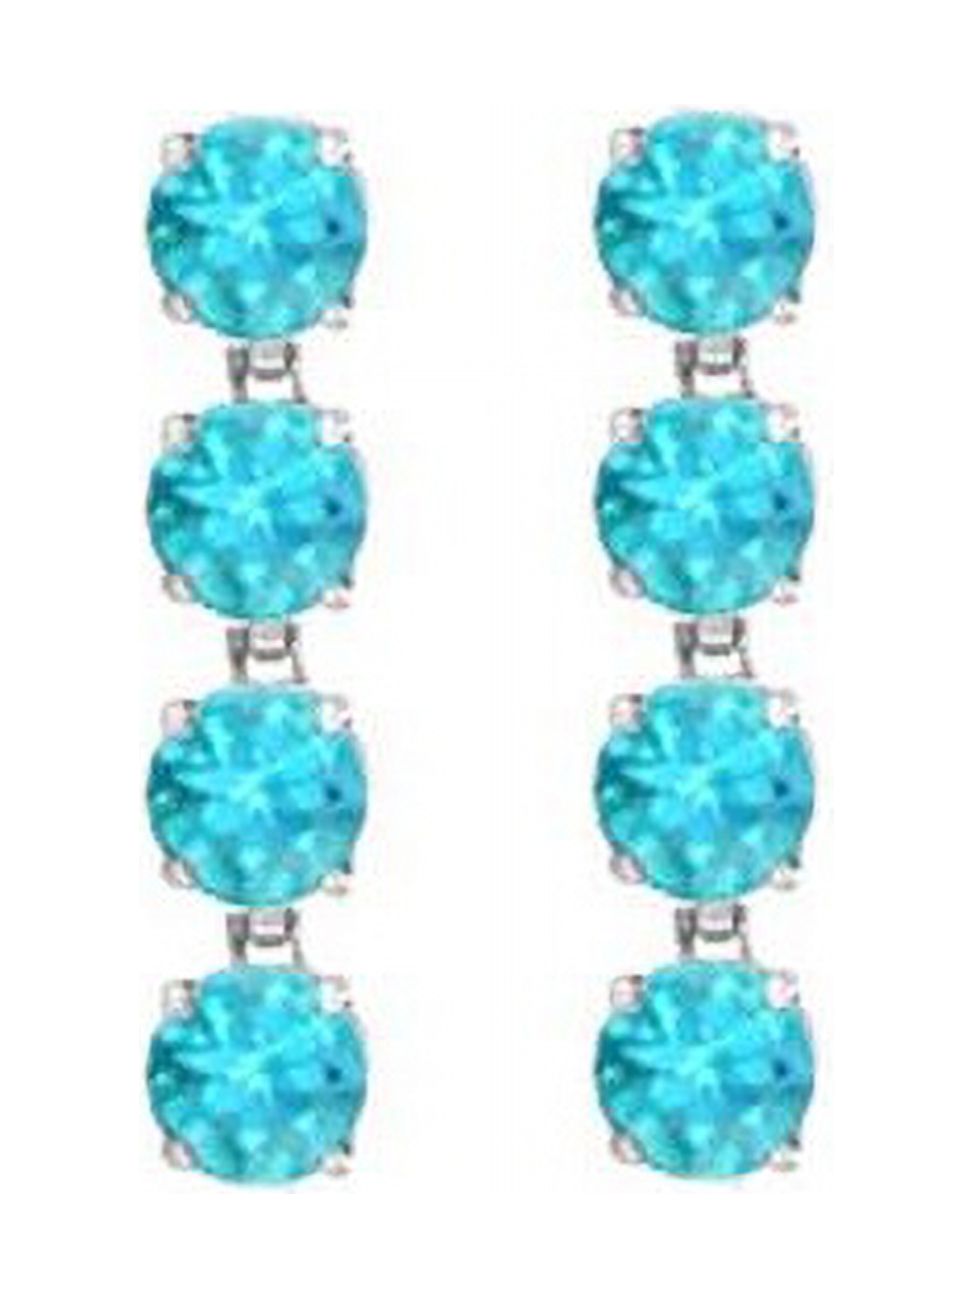 UBER55W14BT Eight Carat Round Created Blue Topaz Drop Earrings in 14K White Gold Prong Setting - image 1 of 1